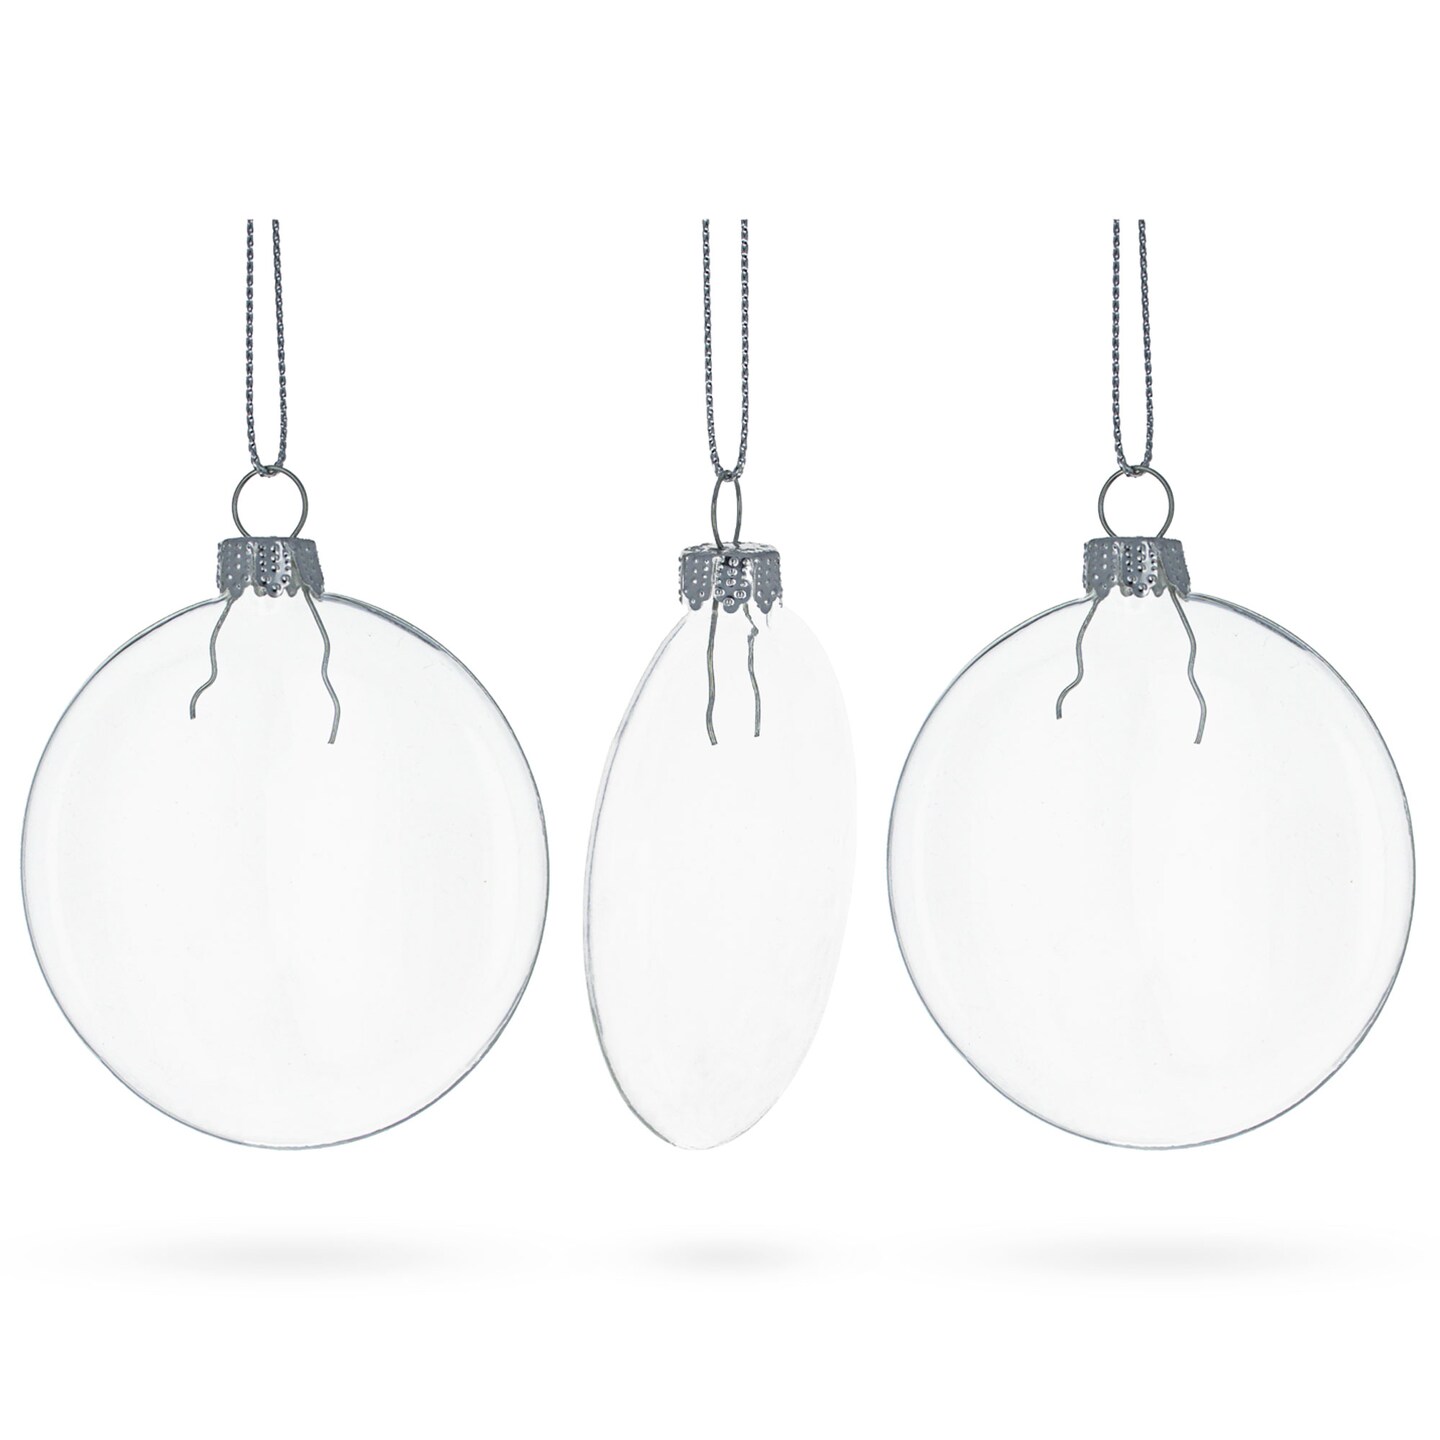 Set of 3 Flat Disc Clear - Blown Glass Christmas Ornaments 3.7 Inches (94 mm)